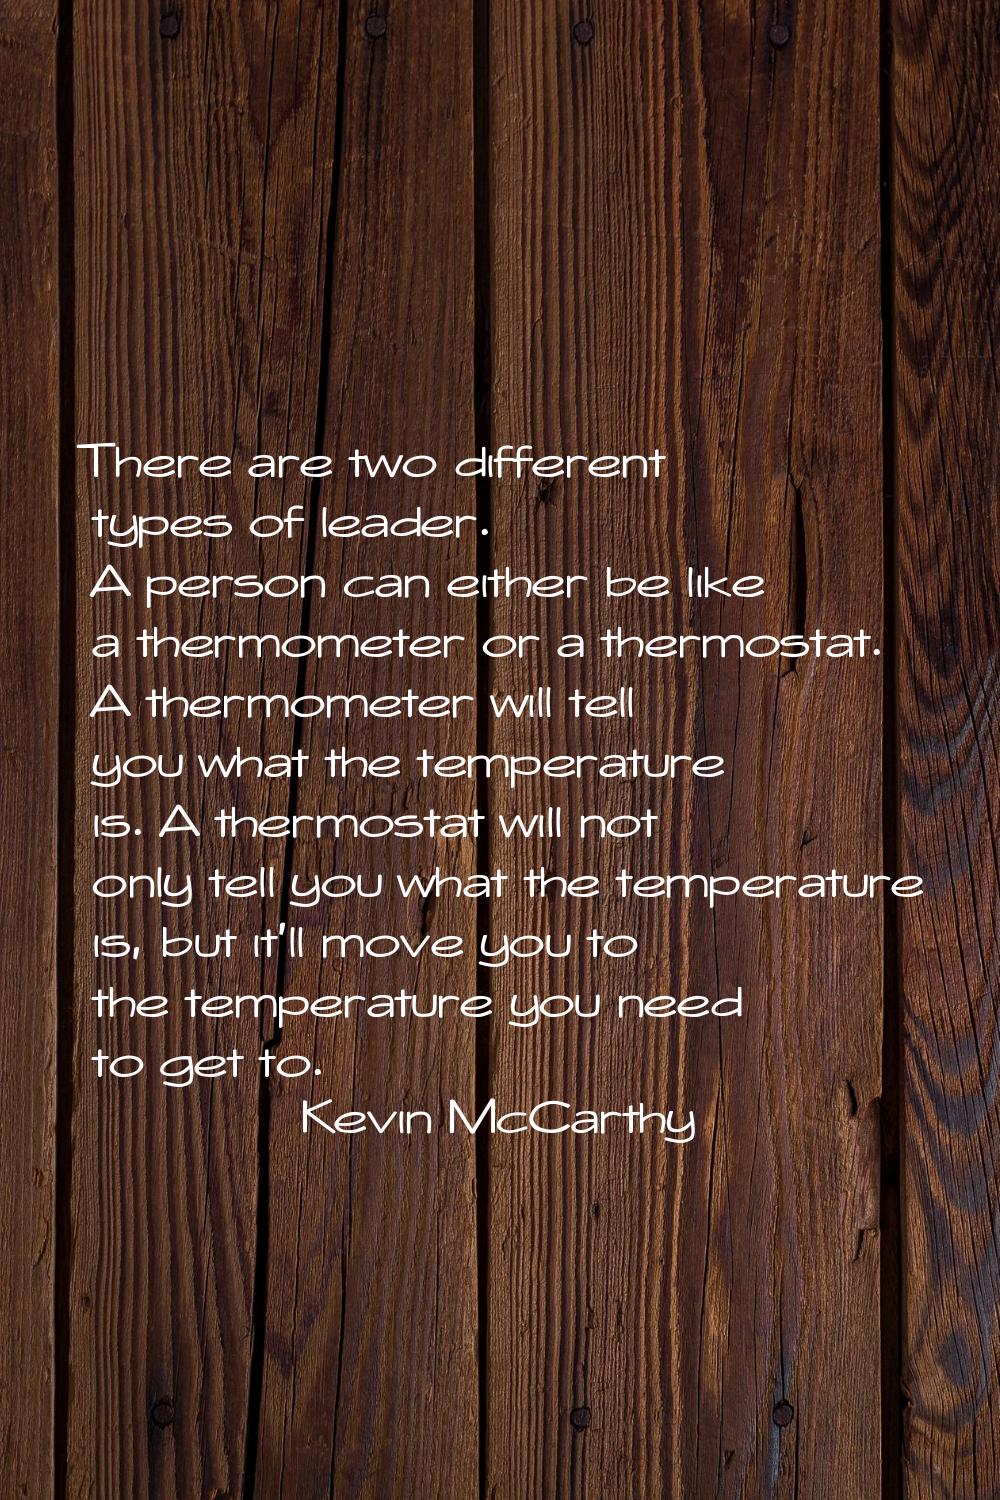 There are two different types of leader. A person can either be like a thermometer or a thermostat.